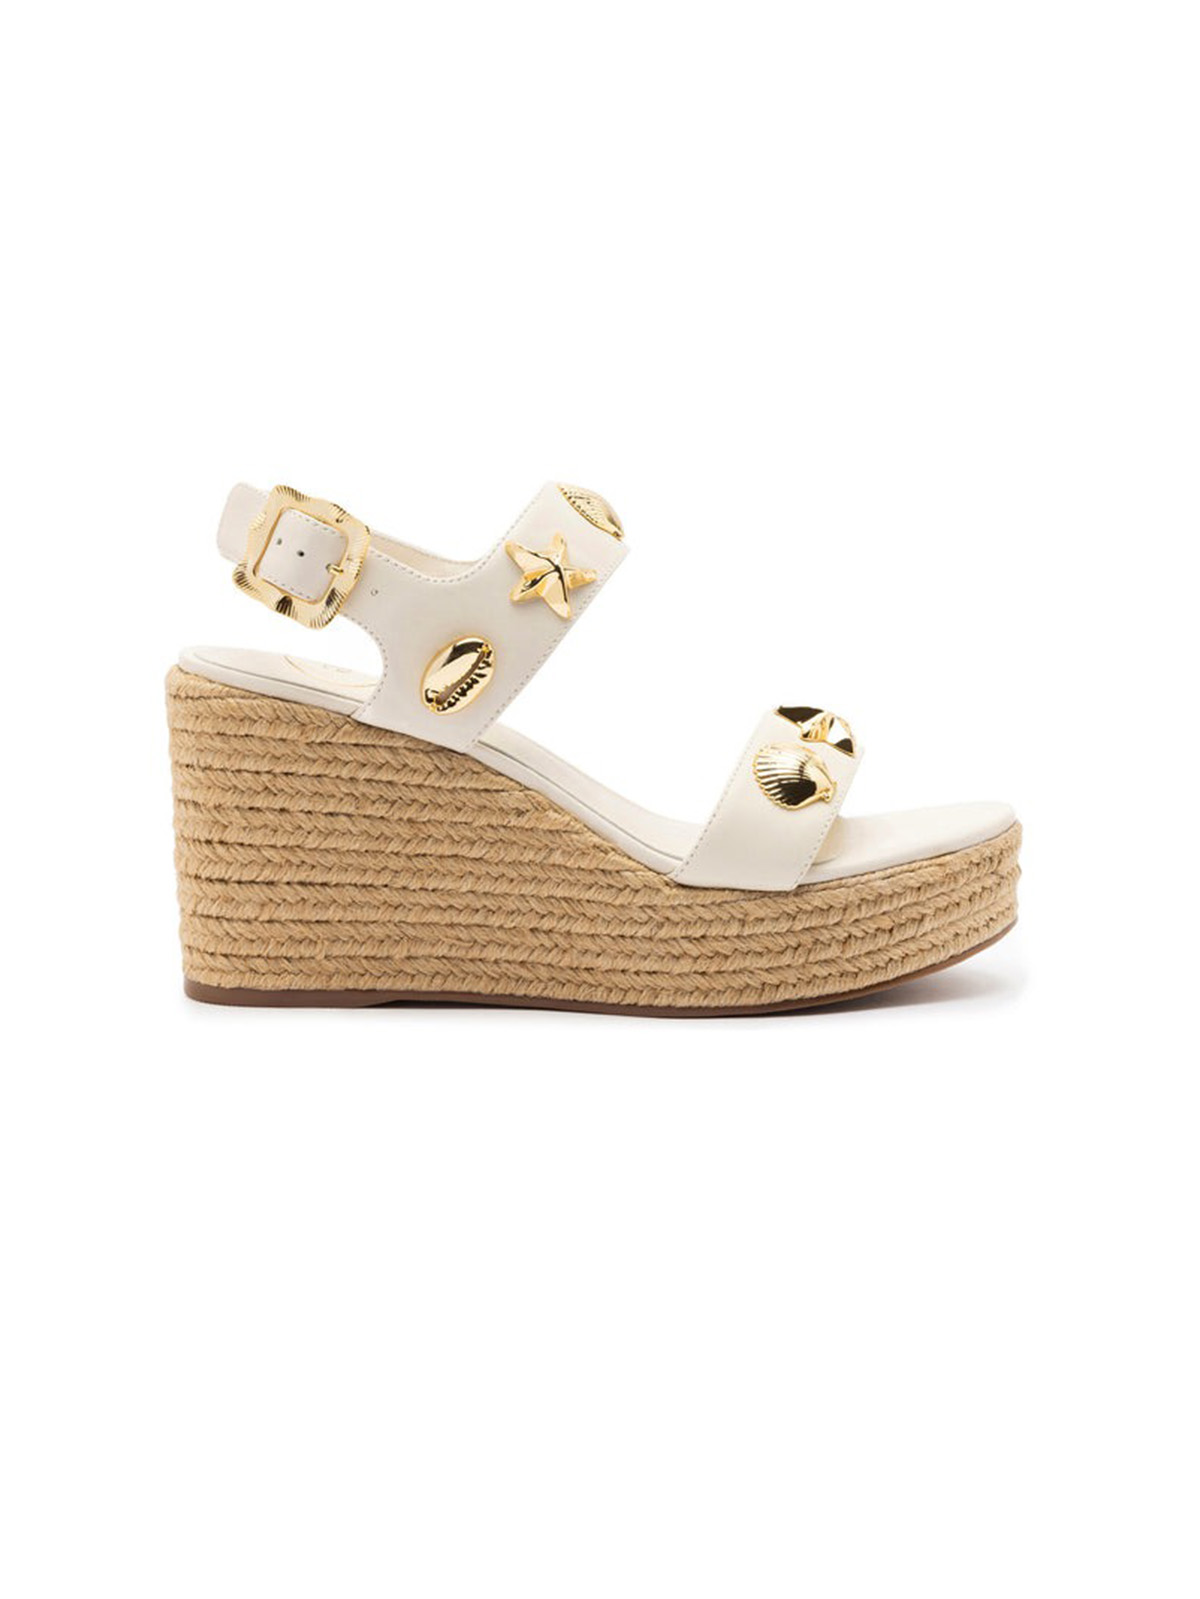 Madison Espadrille in Ivory Leather